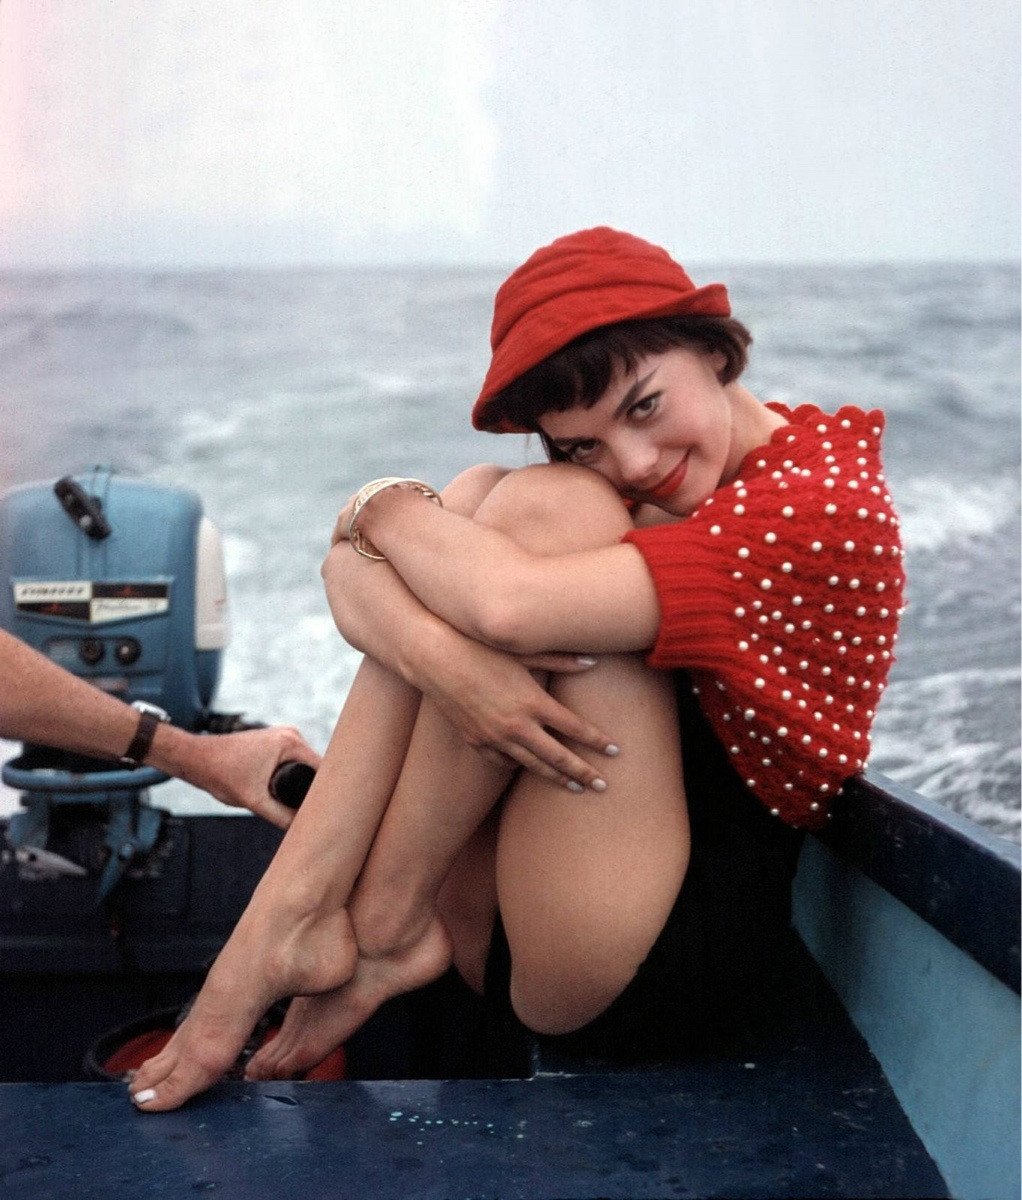 Fascinating Historical Picture of Natalie Wood in 1955 